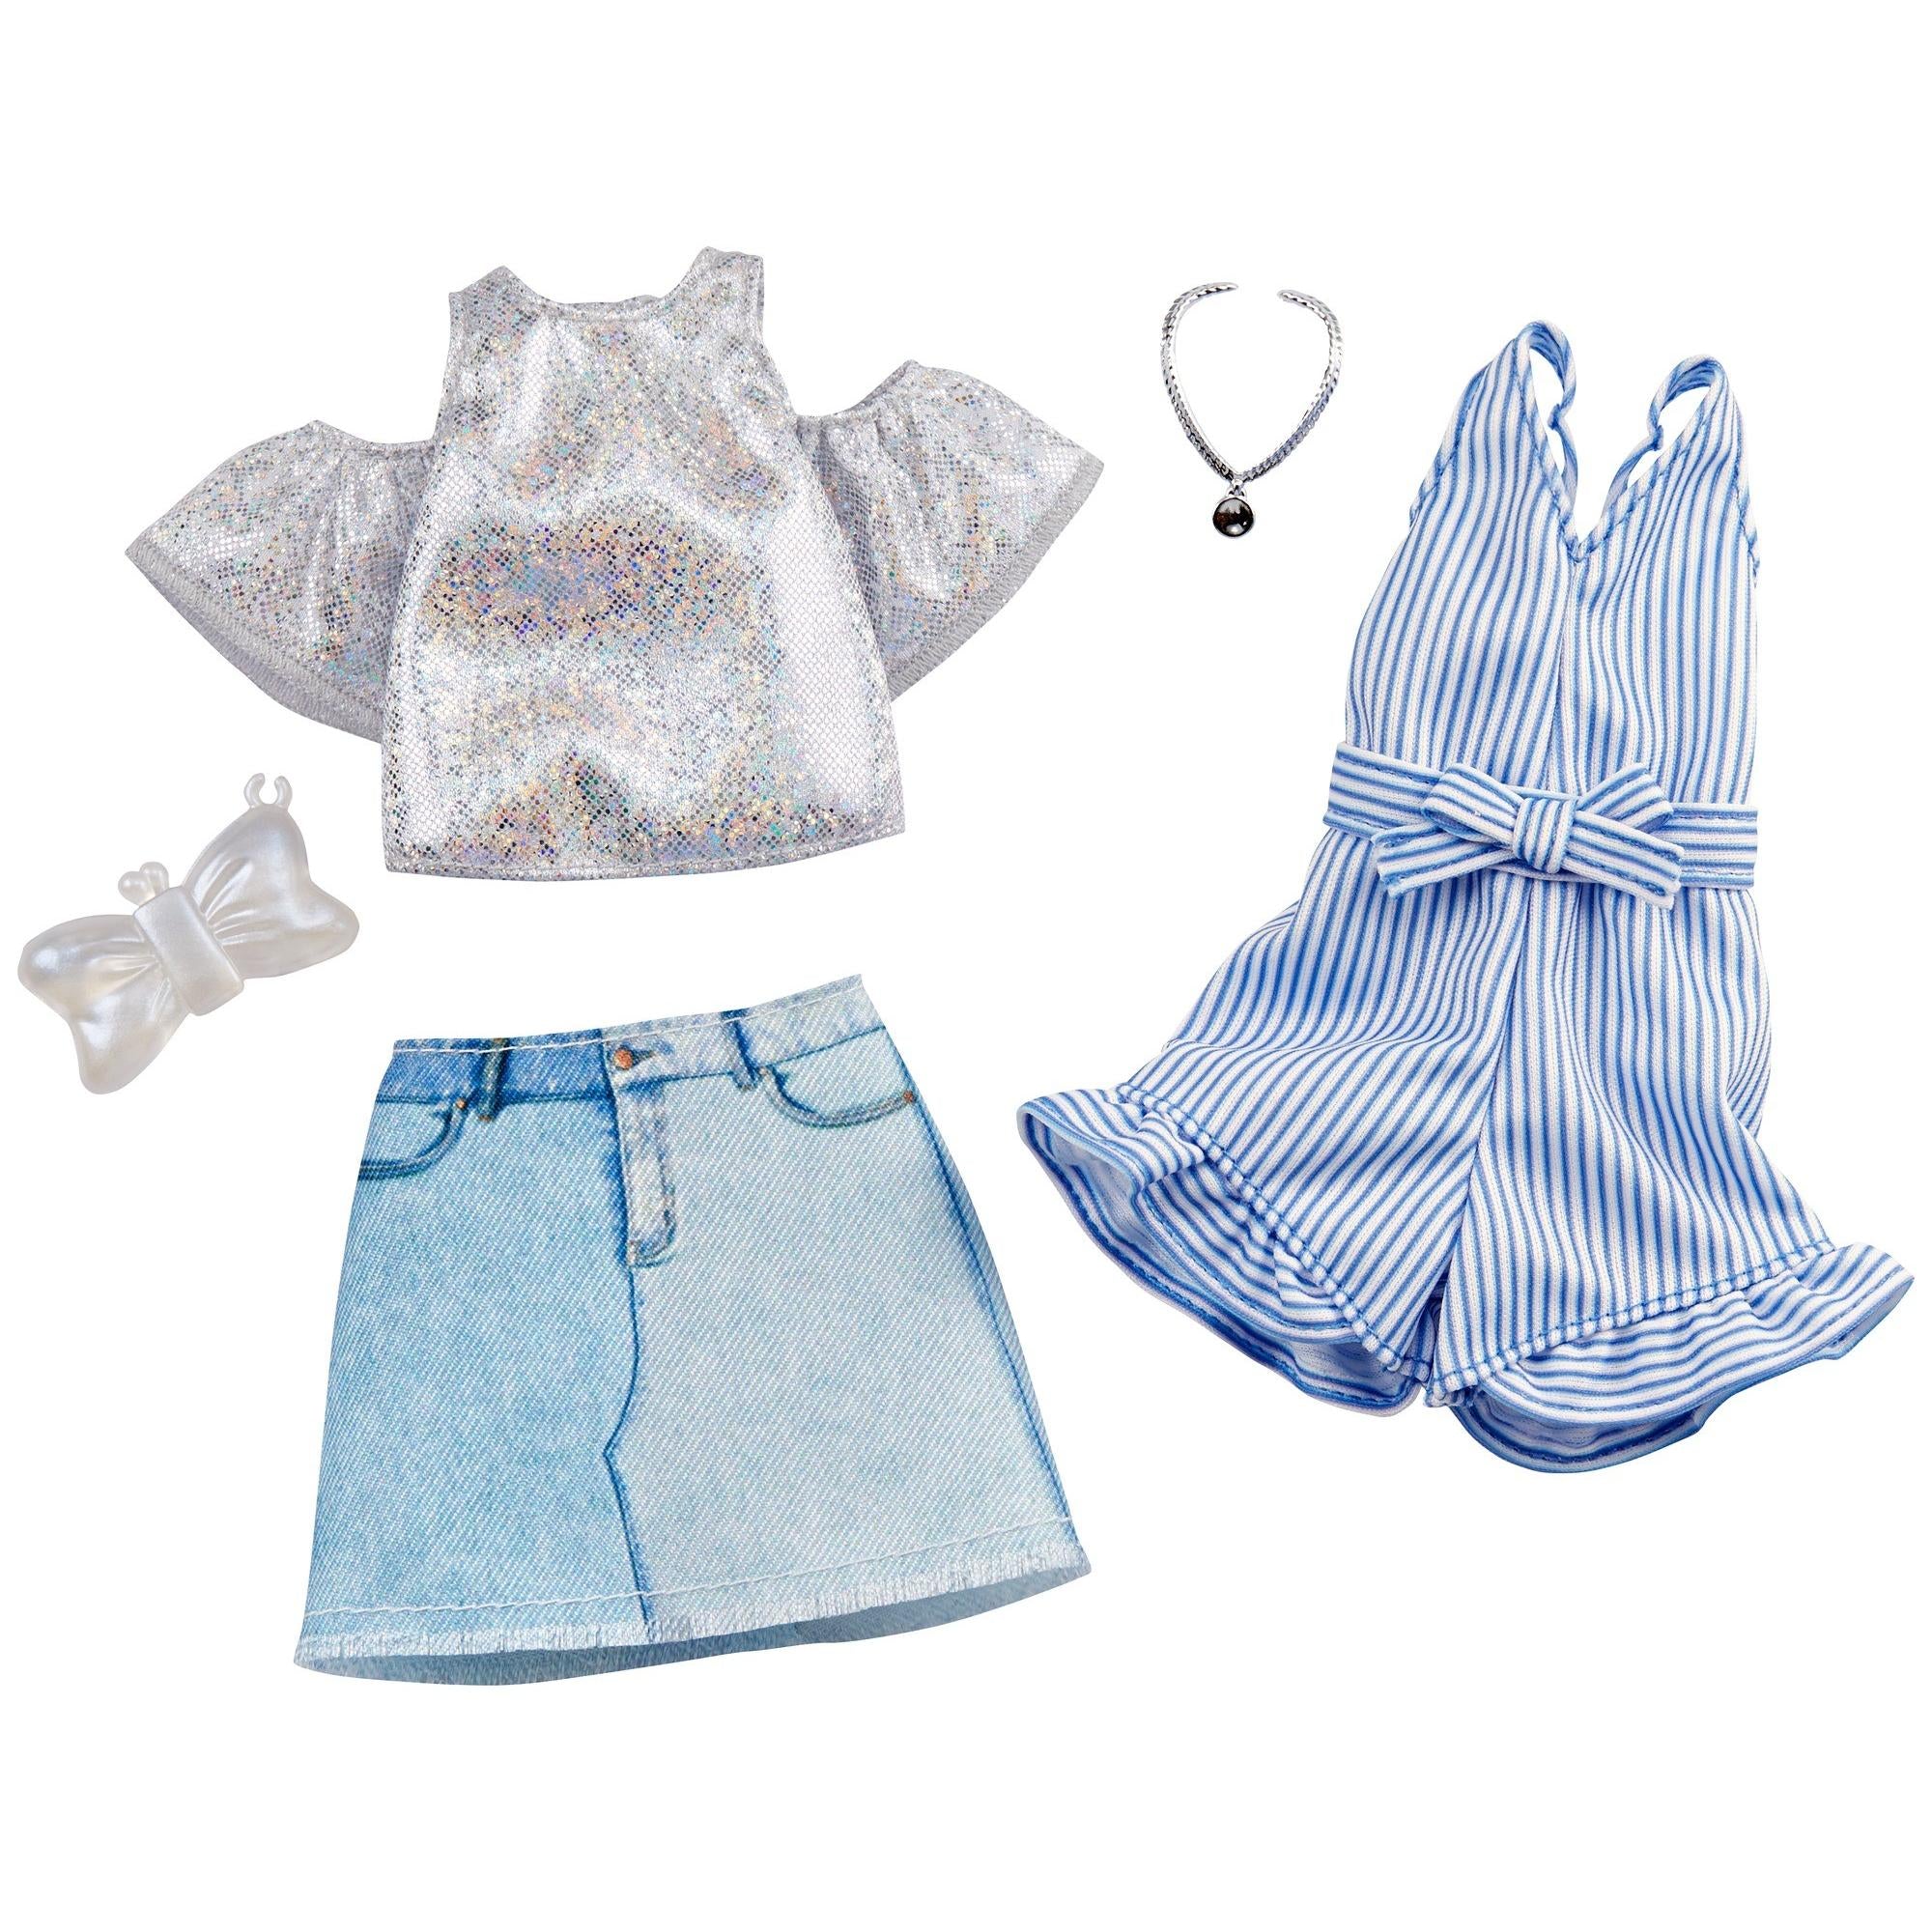 Barbie Clothes 2 Outfits And 2 Accessories For Barbie Doll – Square Imports